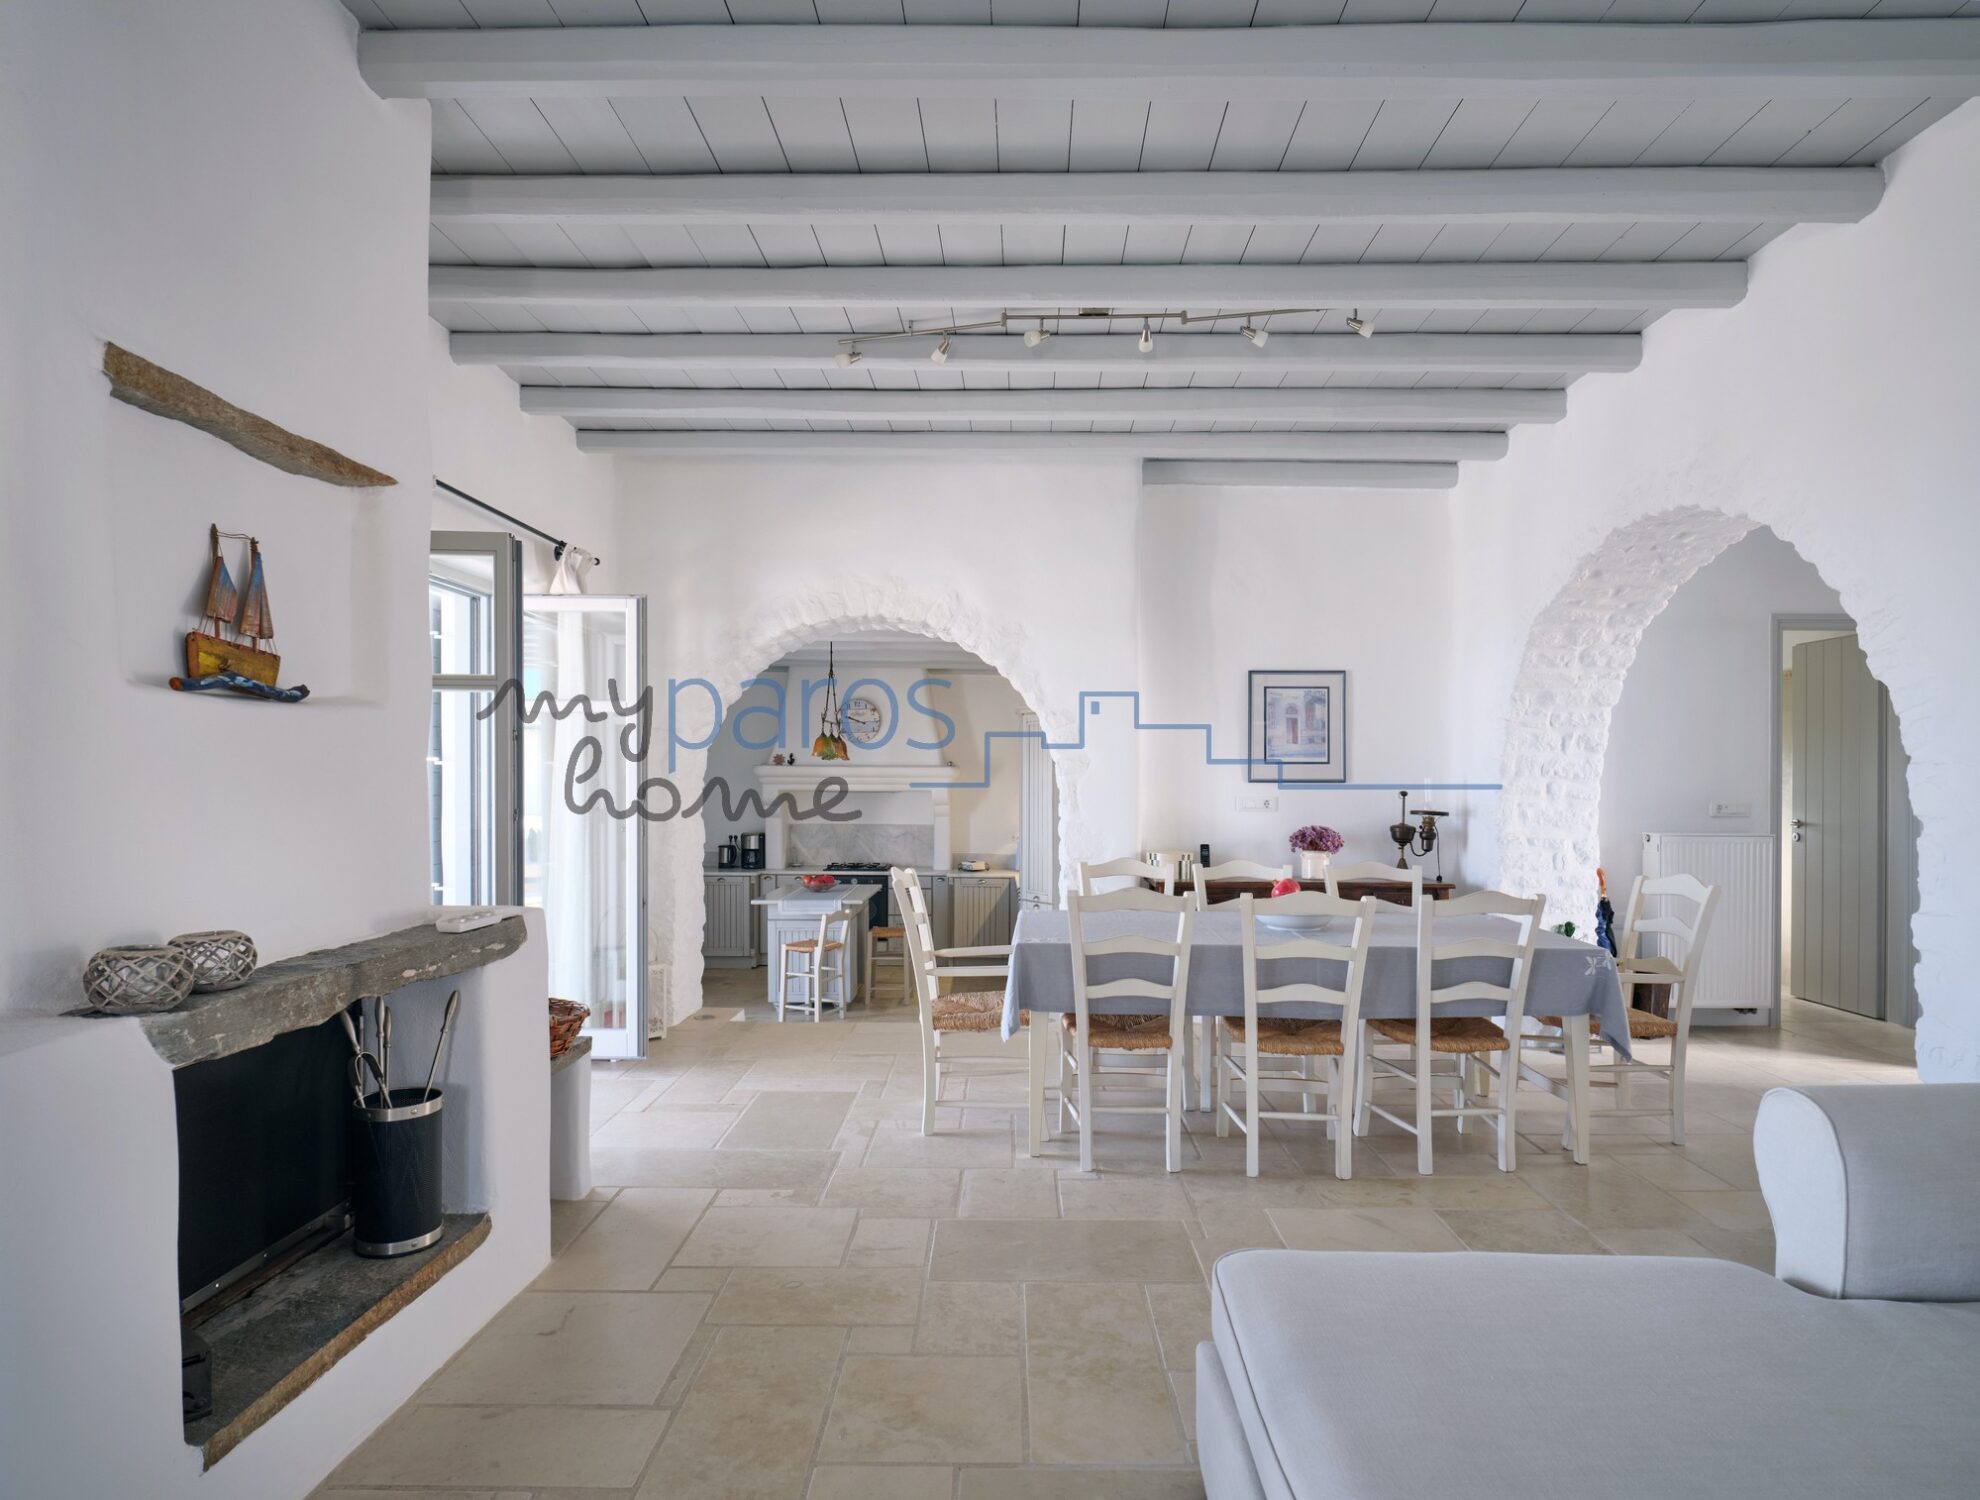 Greece Sotheby's Int. Realty - Paros - Catrice3